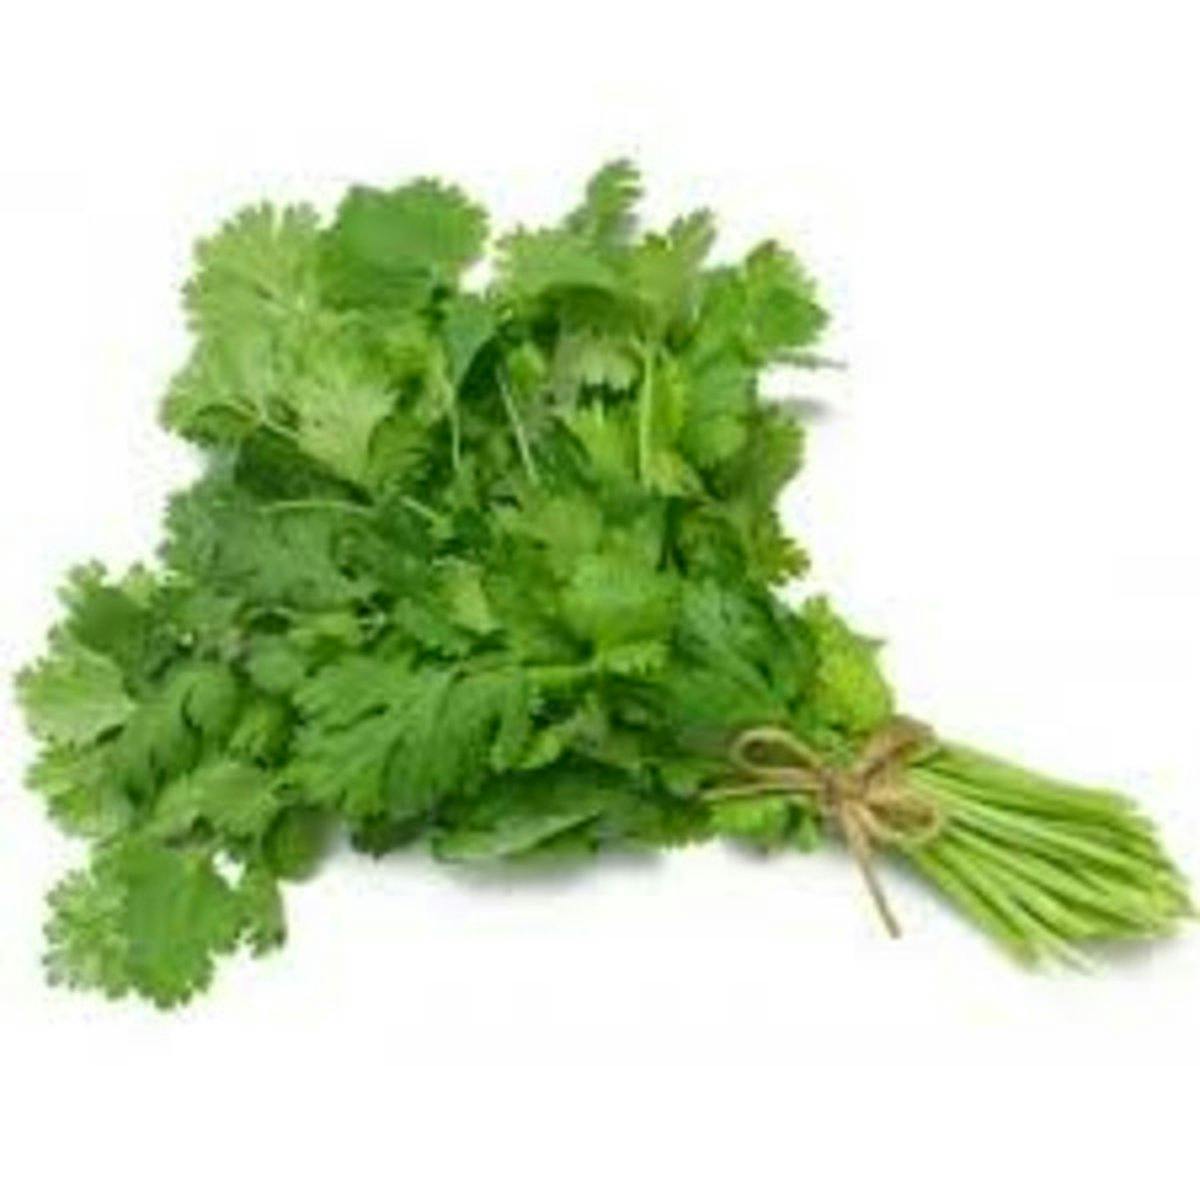 of cilantro or parsely, chopped